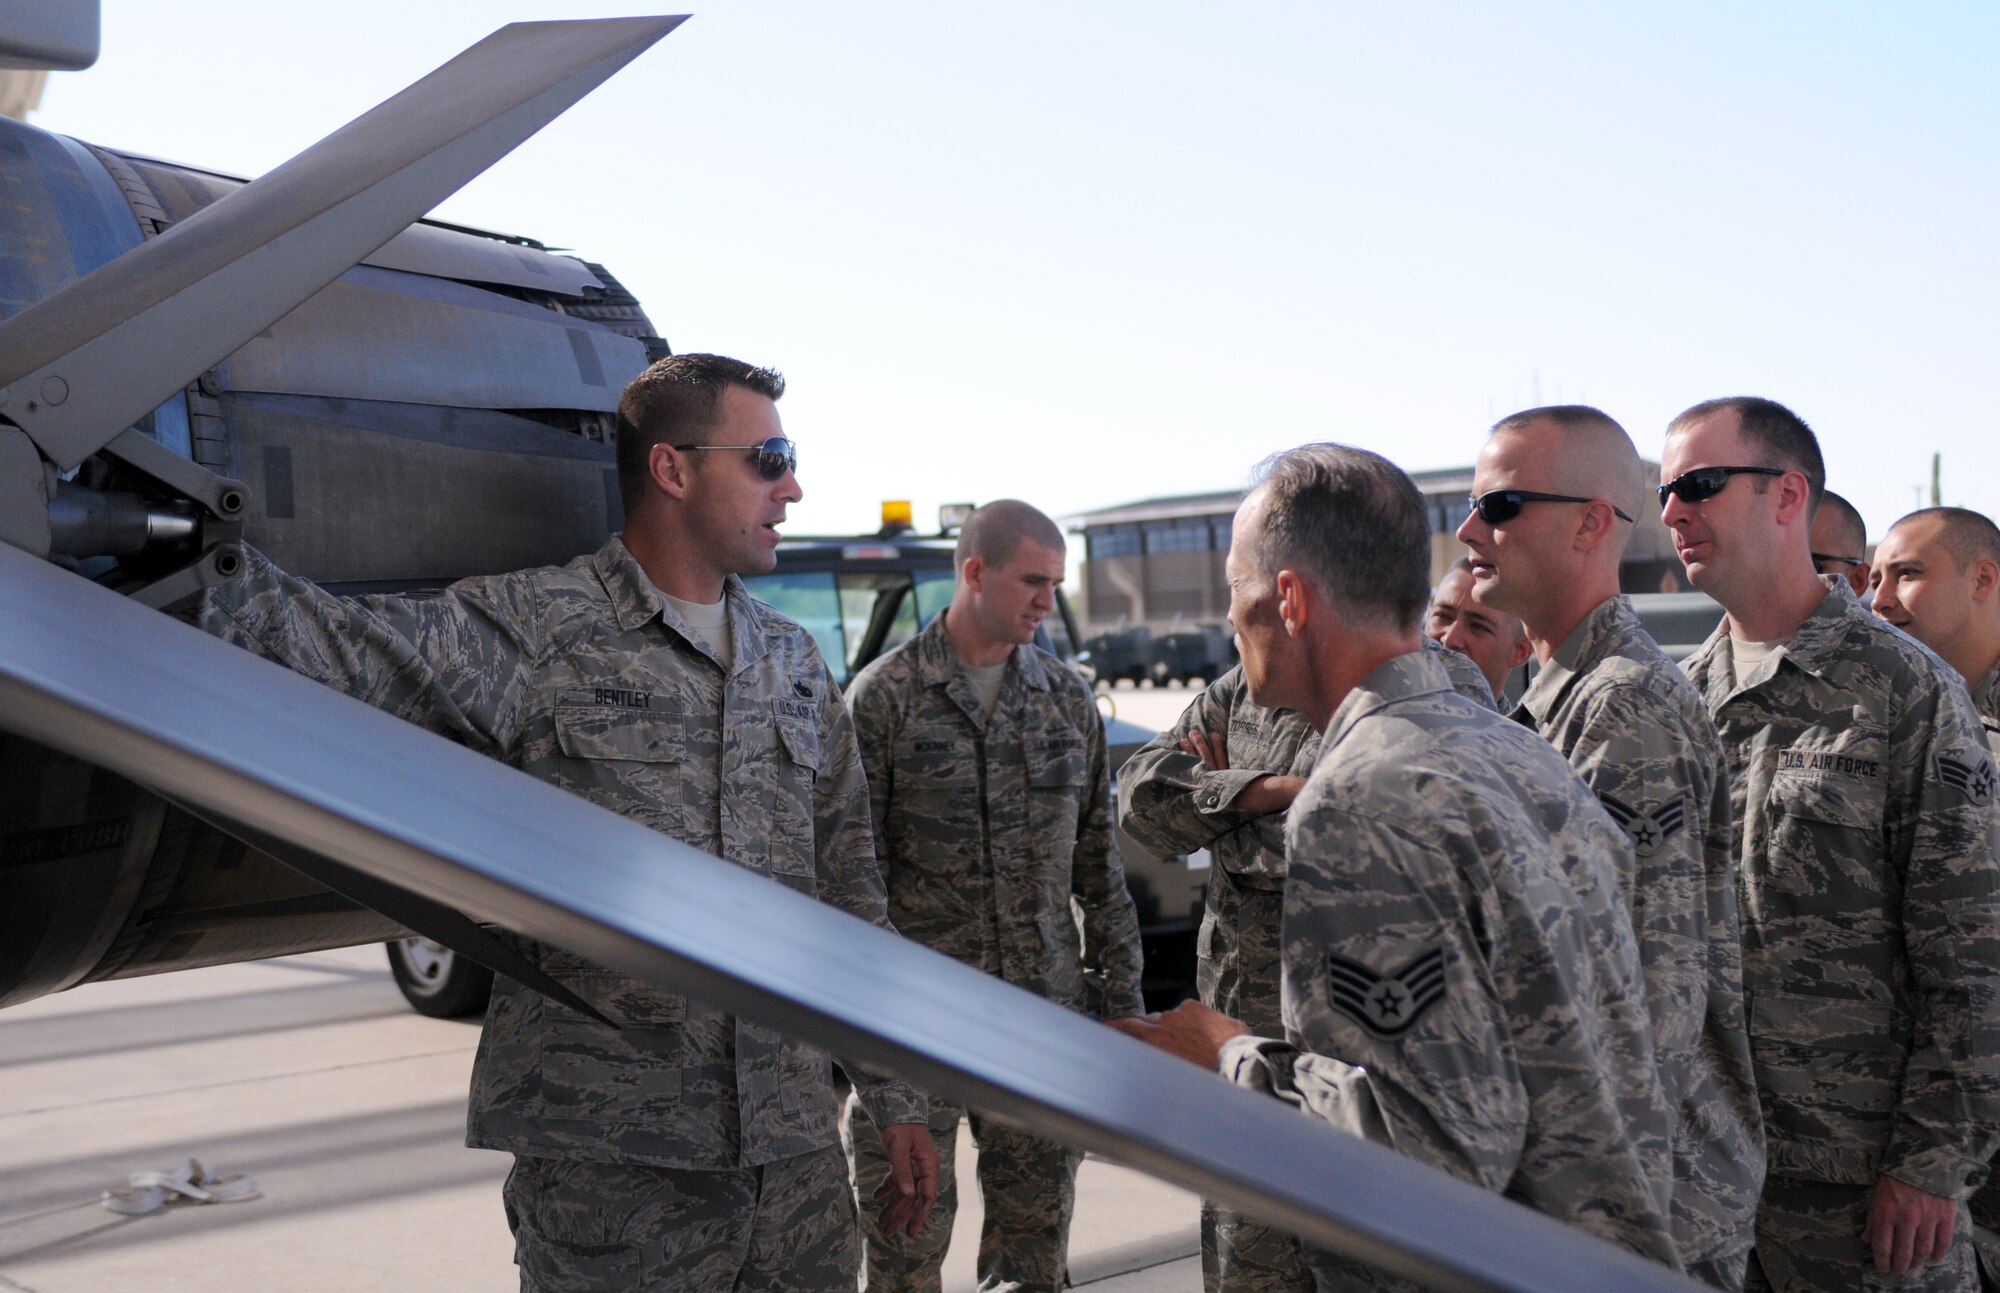 Tech. Sgt. Jeff Bentley, an instructor with the Tucson Aircraft Maintenance School, shows students around an F-16 Fighting Falcon on the Davis-Monthan Air Force Base flightline June 15. The first eight students to attend the school will graduate Aug. 17 as crew chiefs for their respective Air National Guard fighter units. The new school, operated by Arizona’s 162nd Fighter Wing, will allow more Guardsmen to receive necessary training in a timely manner. (Air Force photo by Maj. Gabe Johnson)